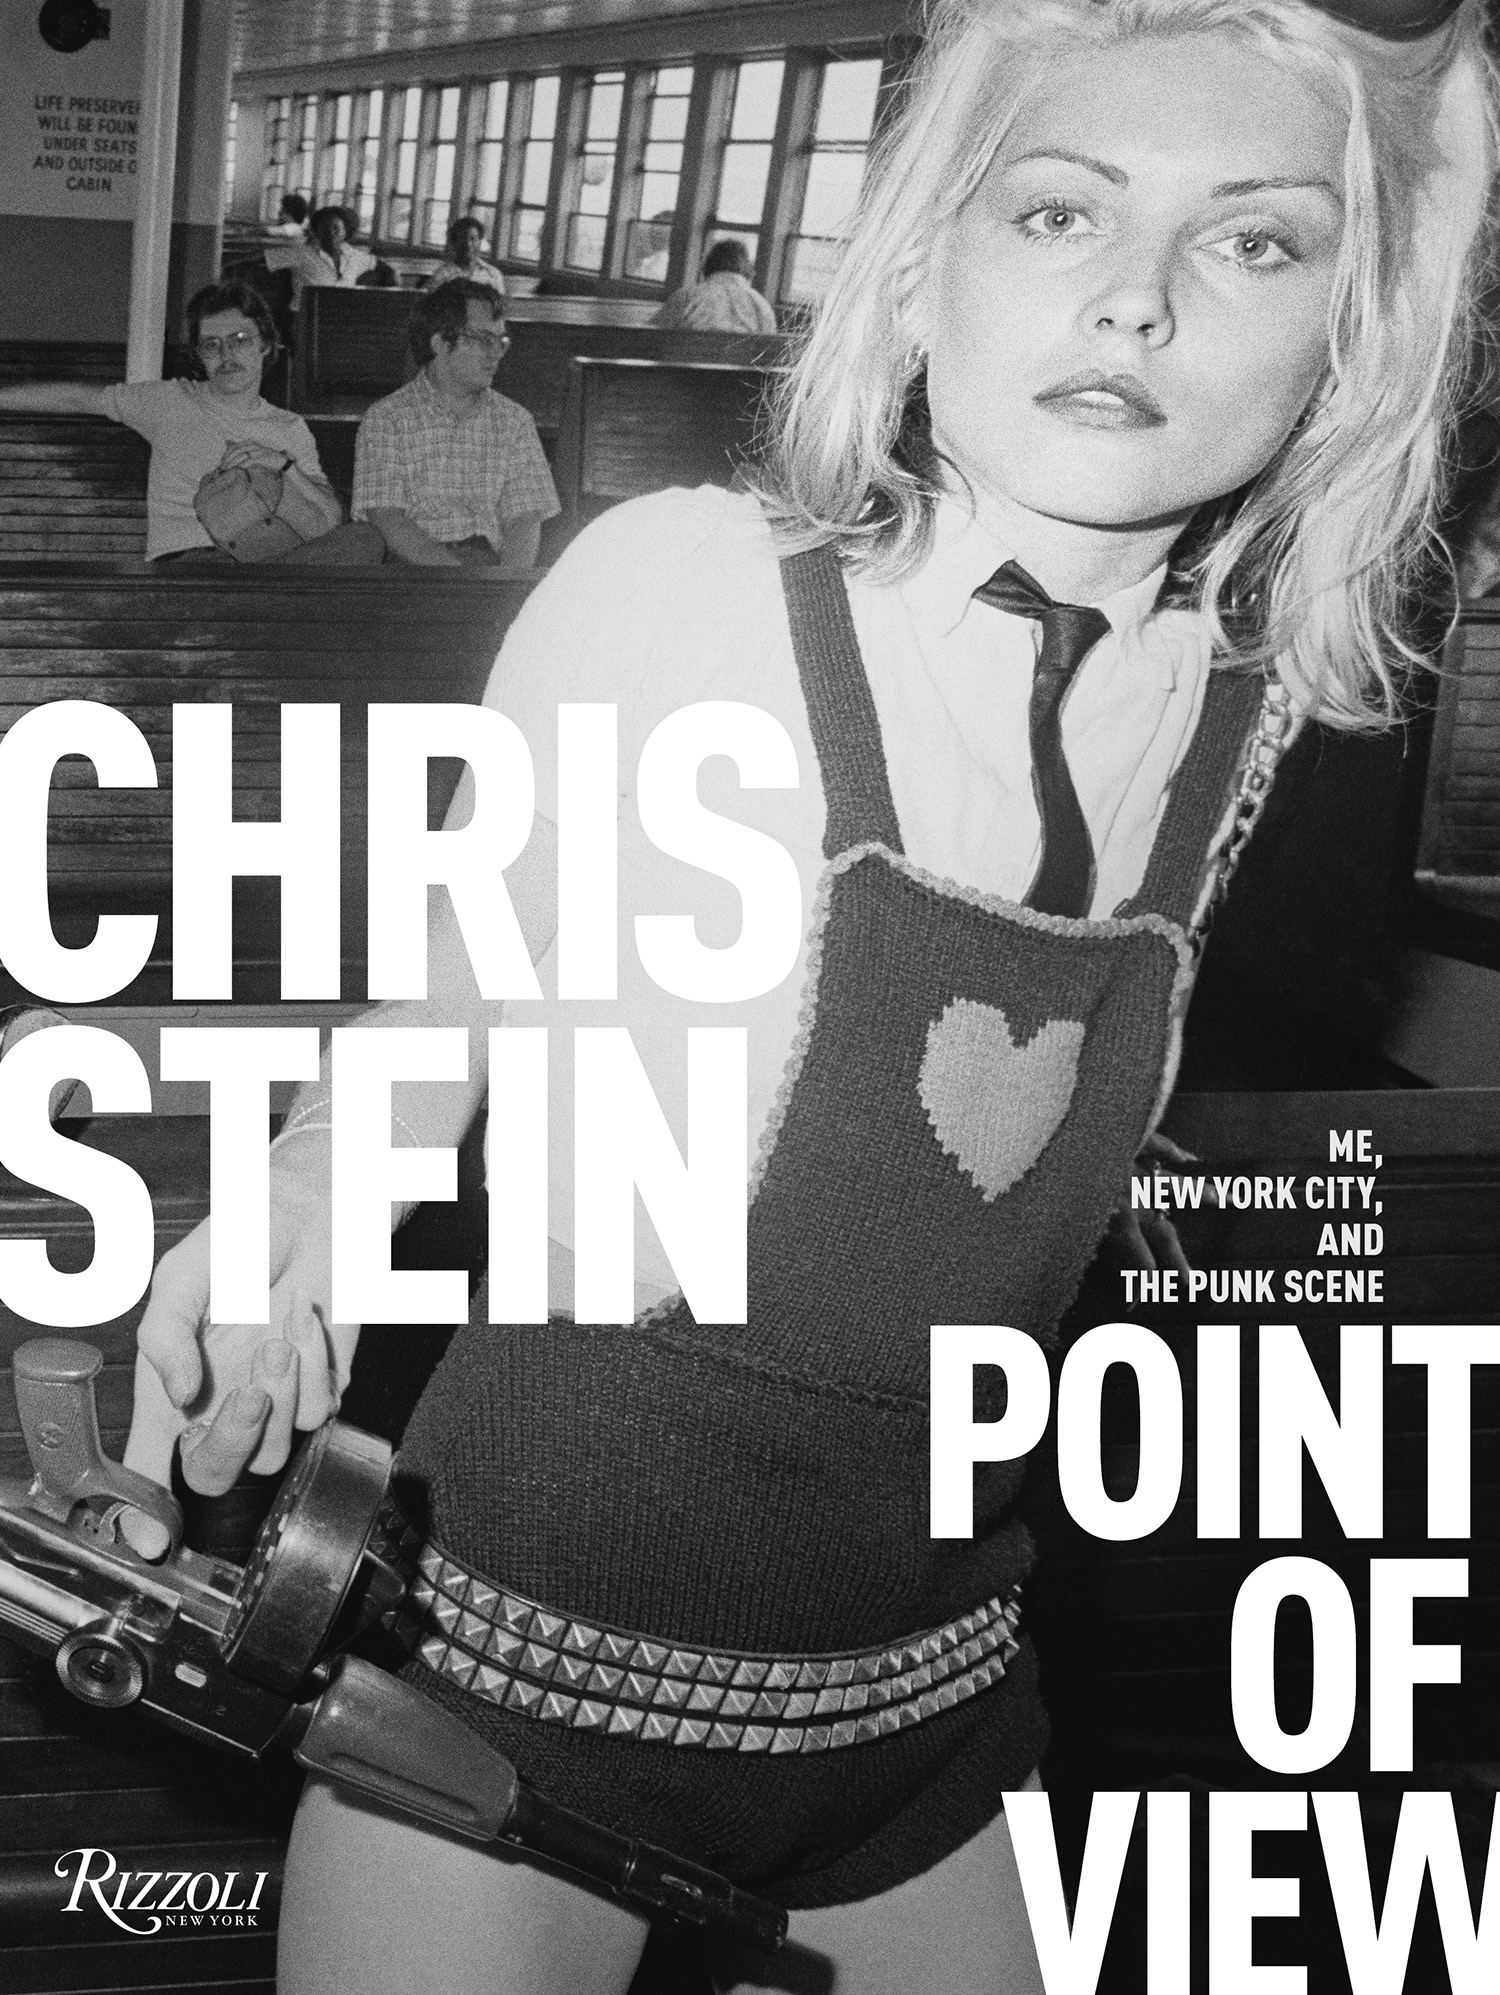 Chris Stein point of View